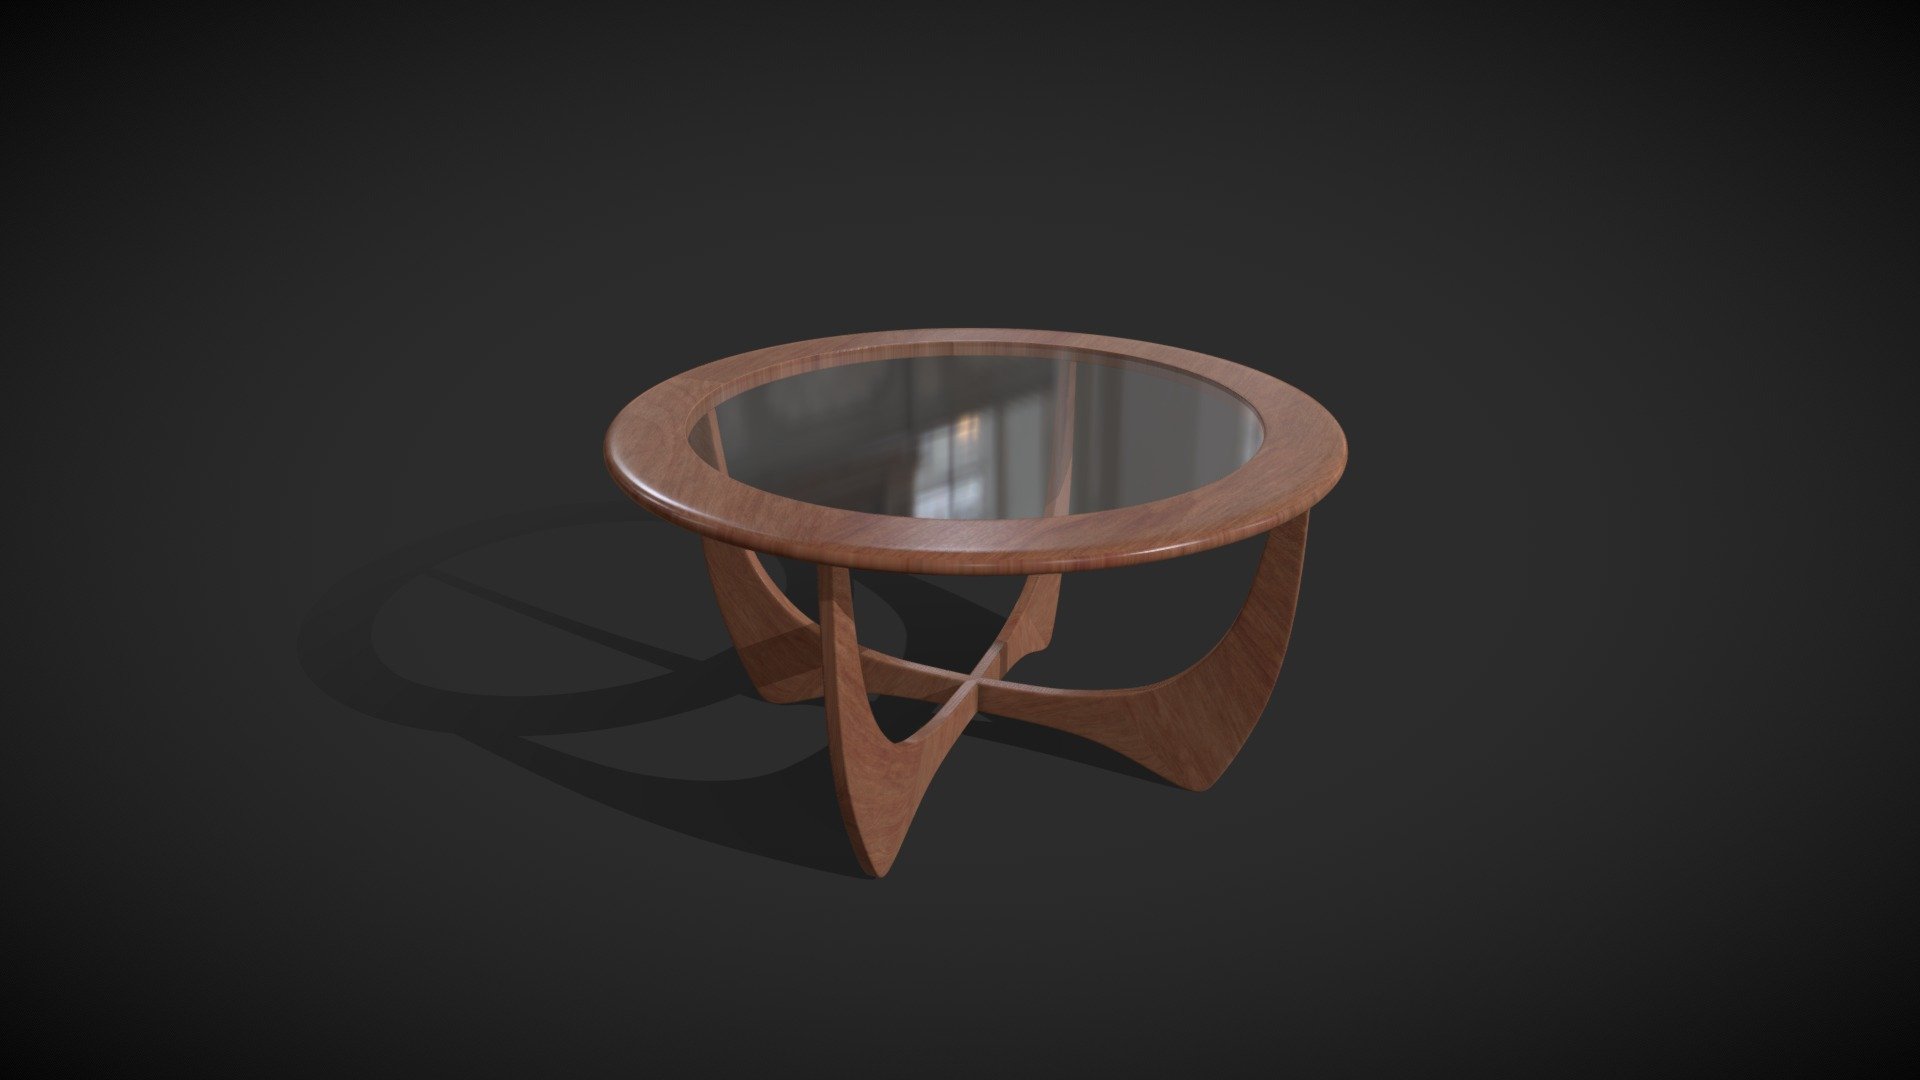 Mid century 1960s round teak and glass G plan Astro coffee table.
Designed by Victor Wilkins for G Plan. A classic and one of the most collectable coffee tables. Often referred to as &lsquo;Astro' although E Gomme gave that name to another design 3d model